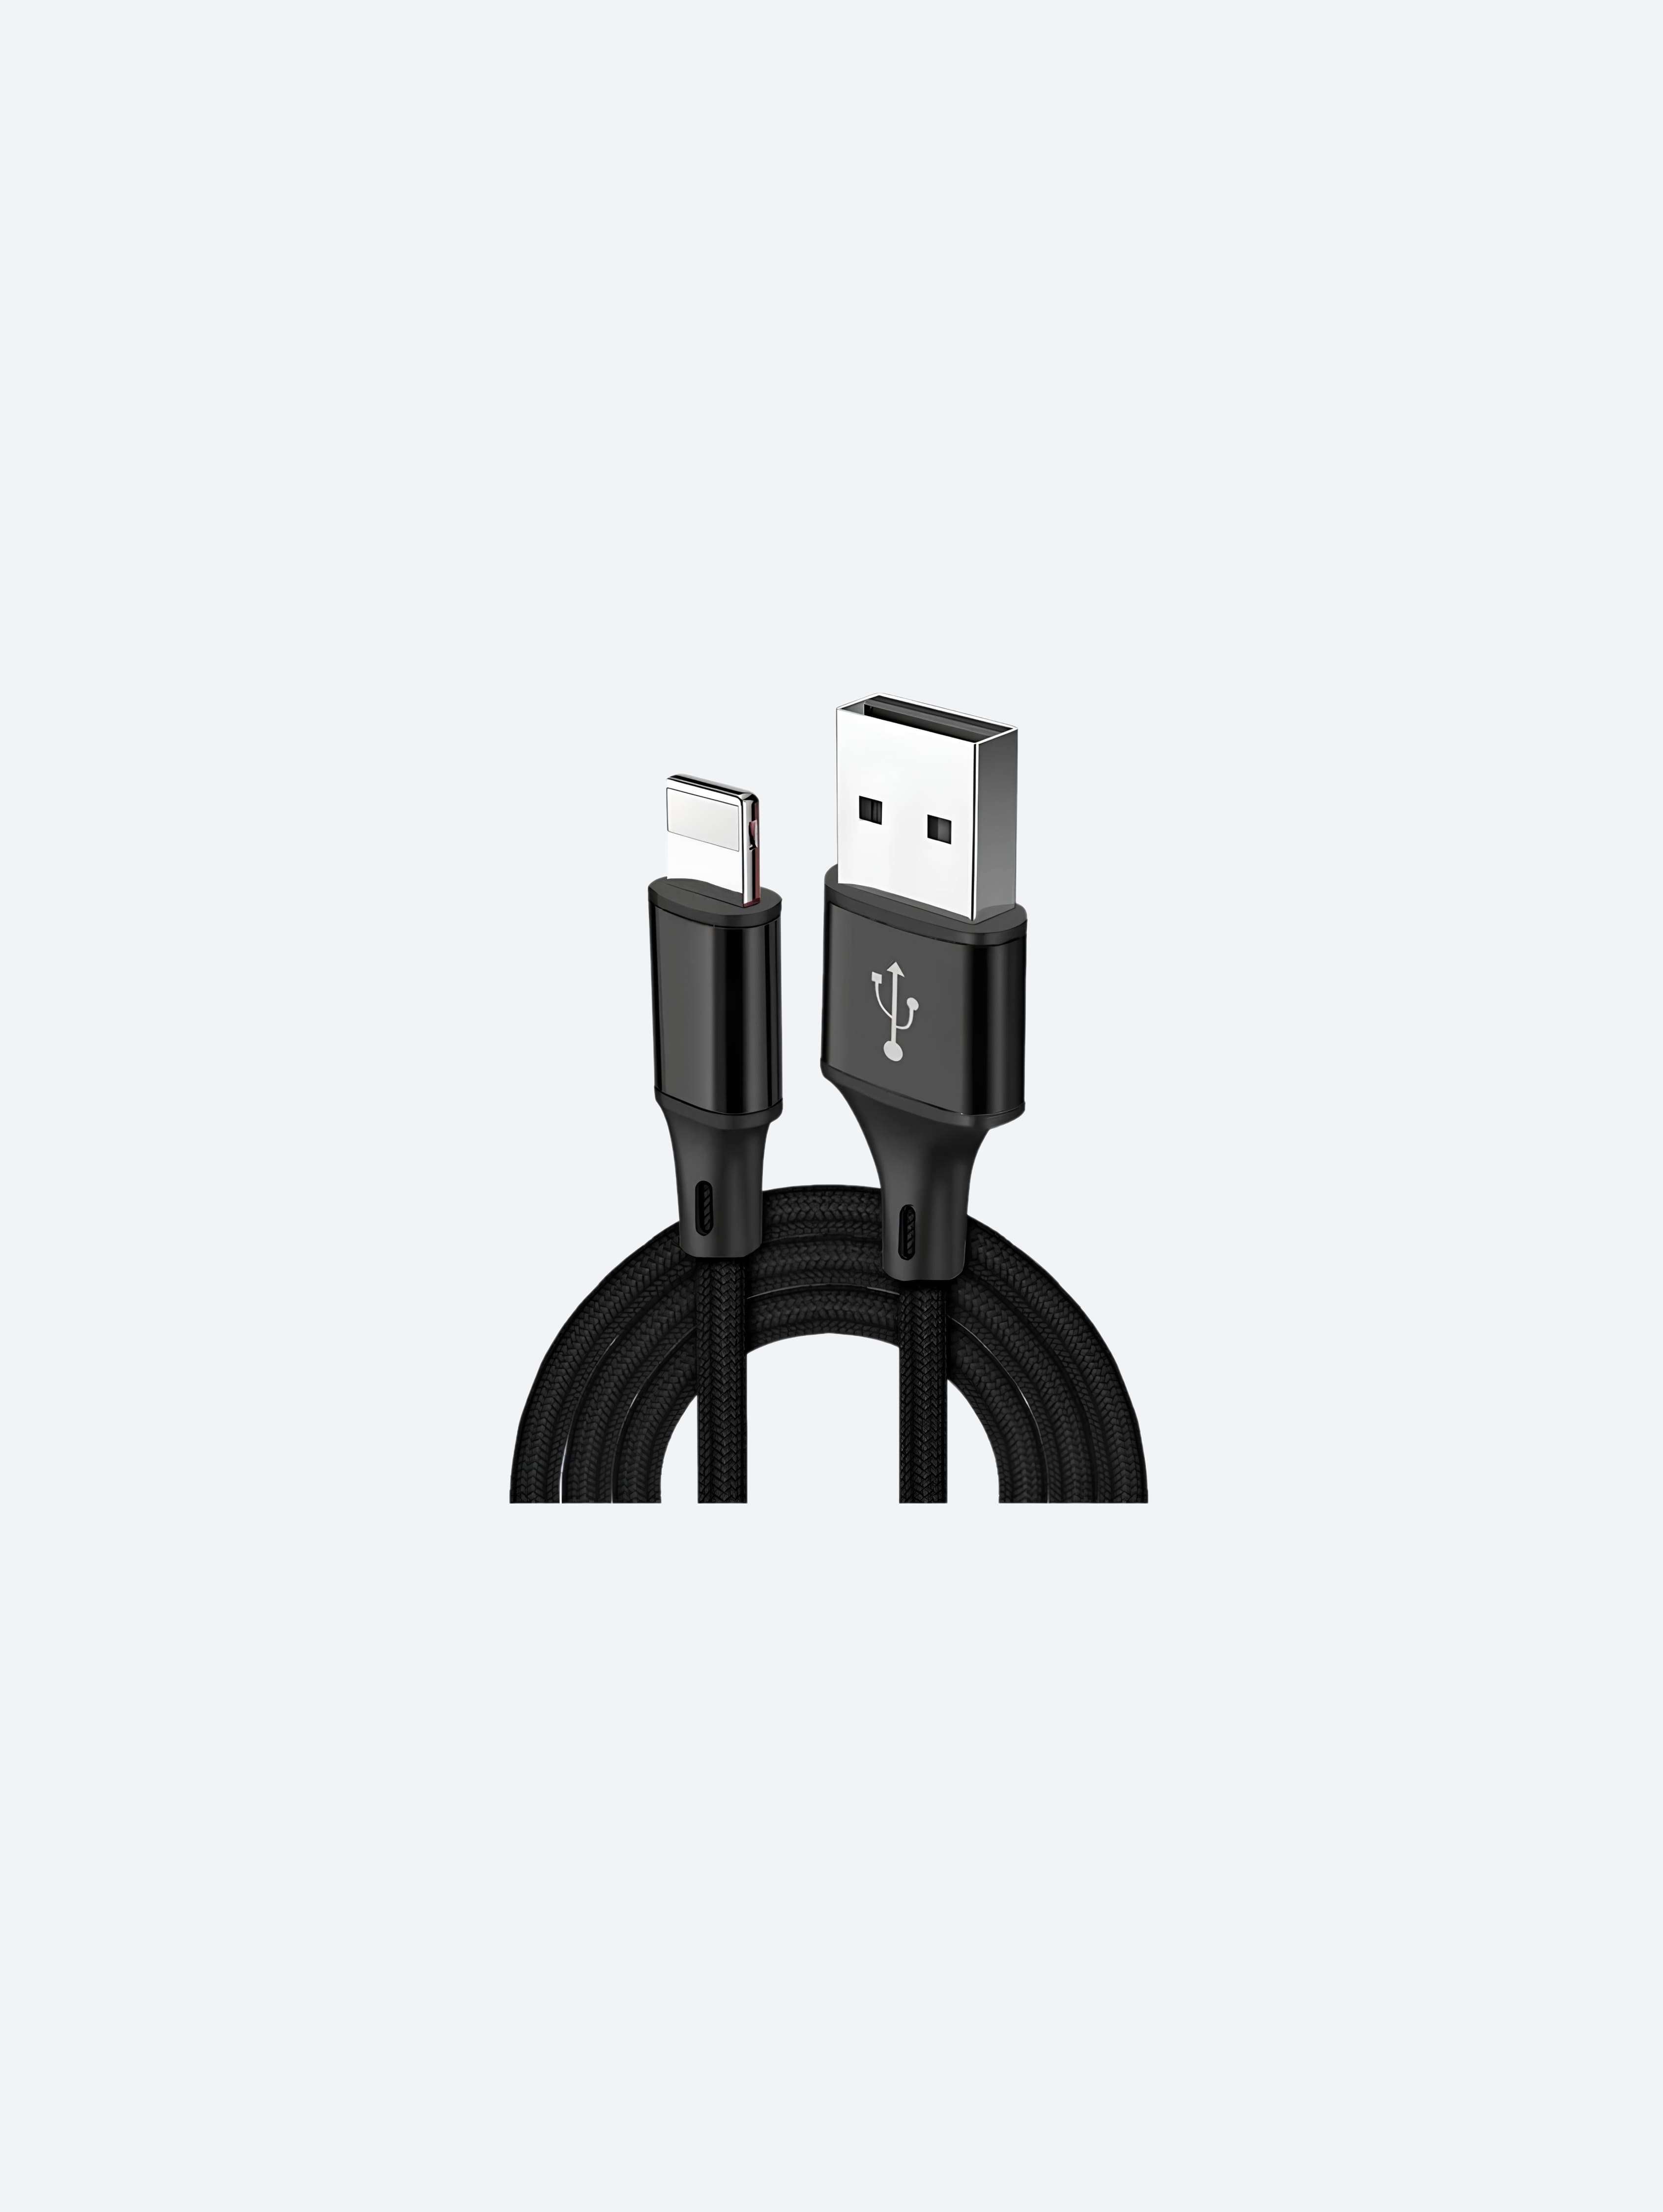 USB C to USB C Cable